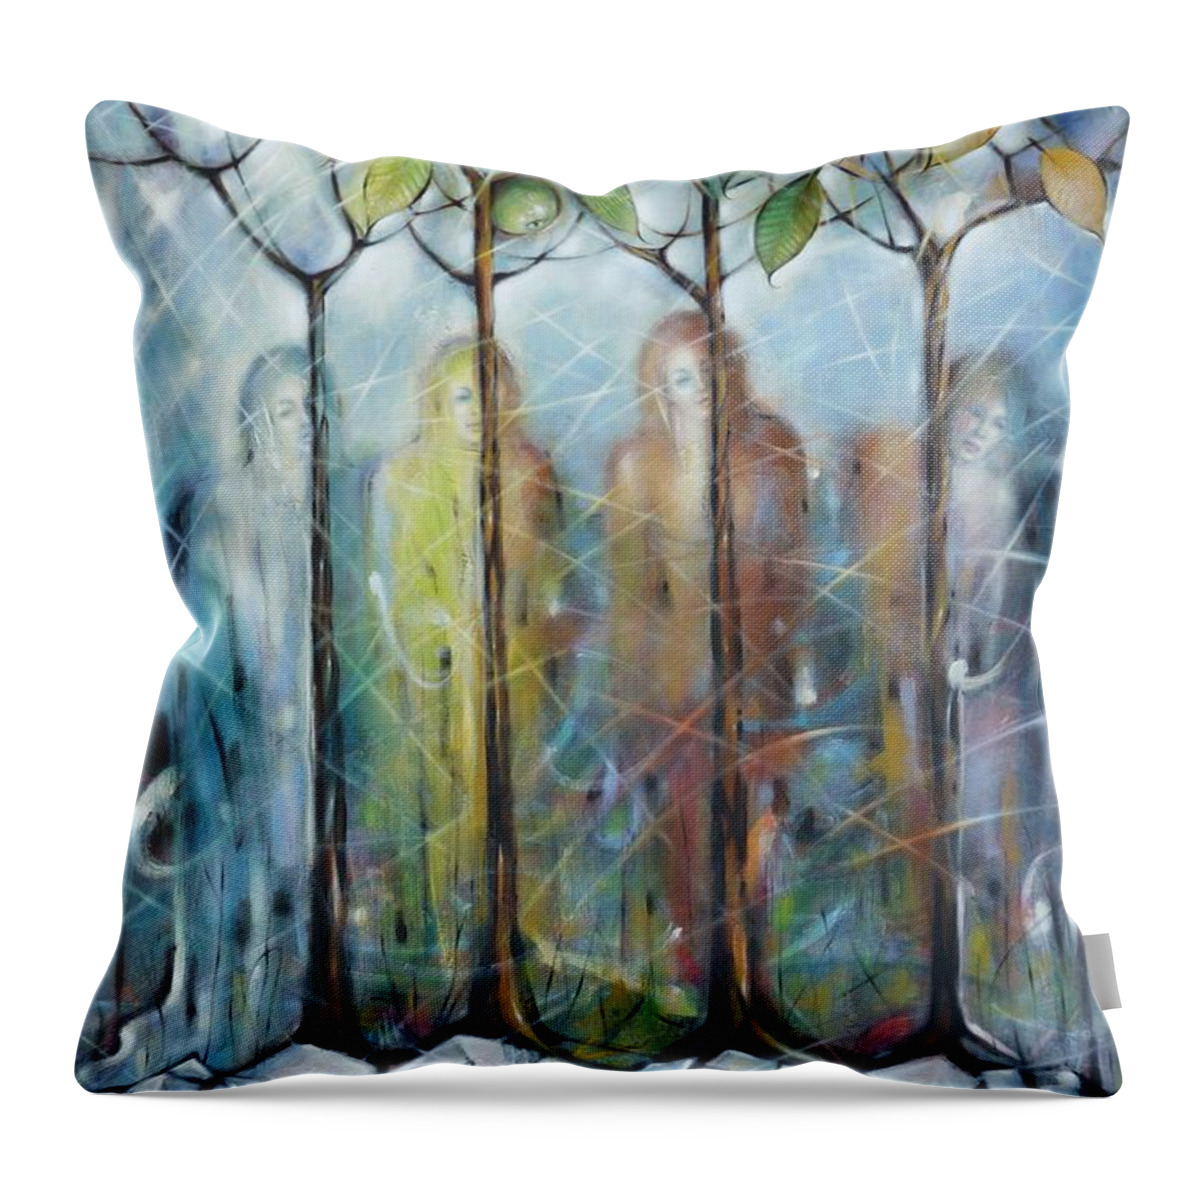 Winter Throw Pillow featuring the painting 4 Seasons On Ice 061110 by Selena Boron